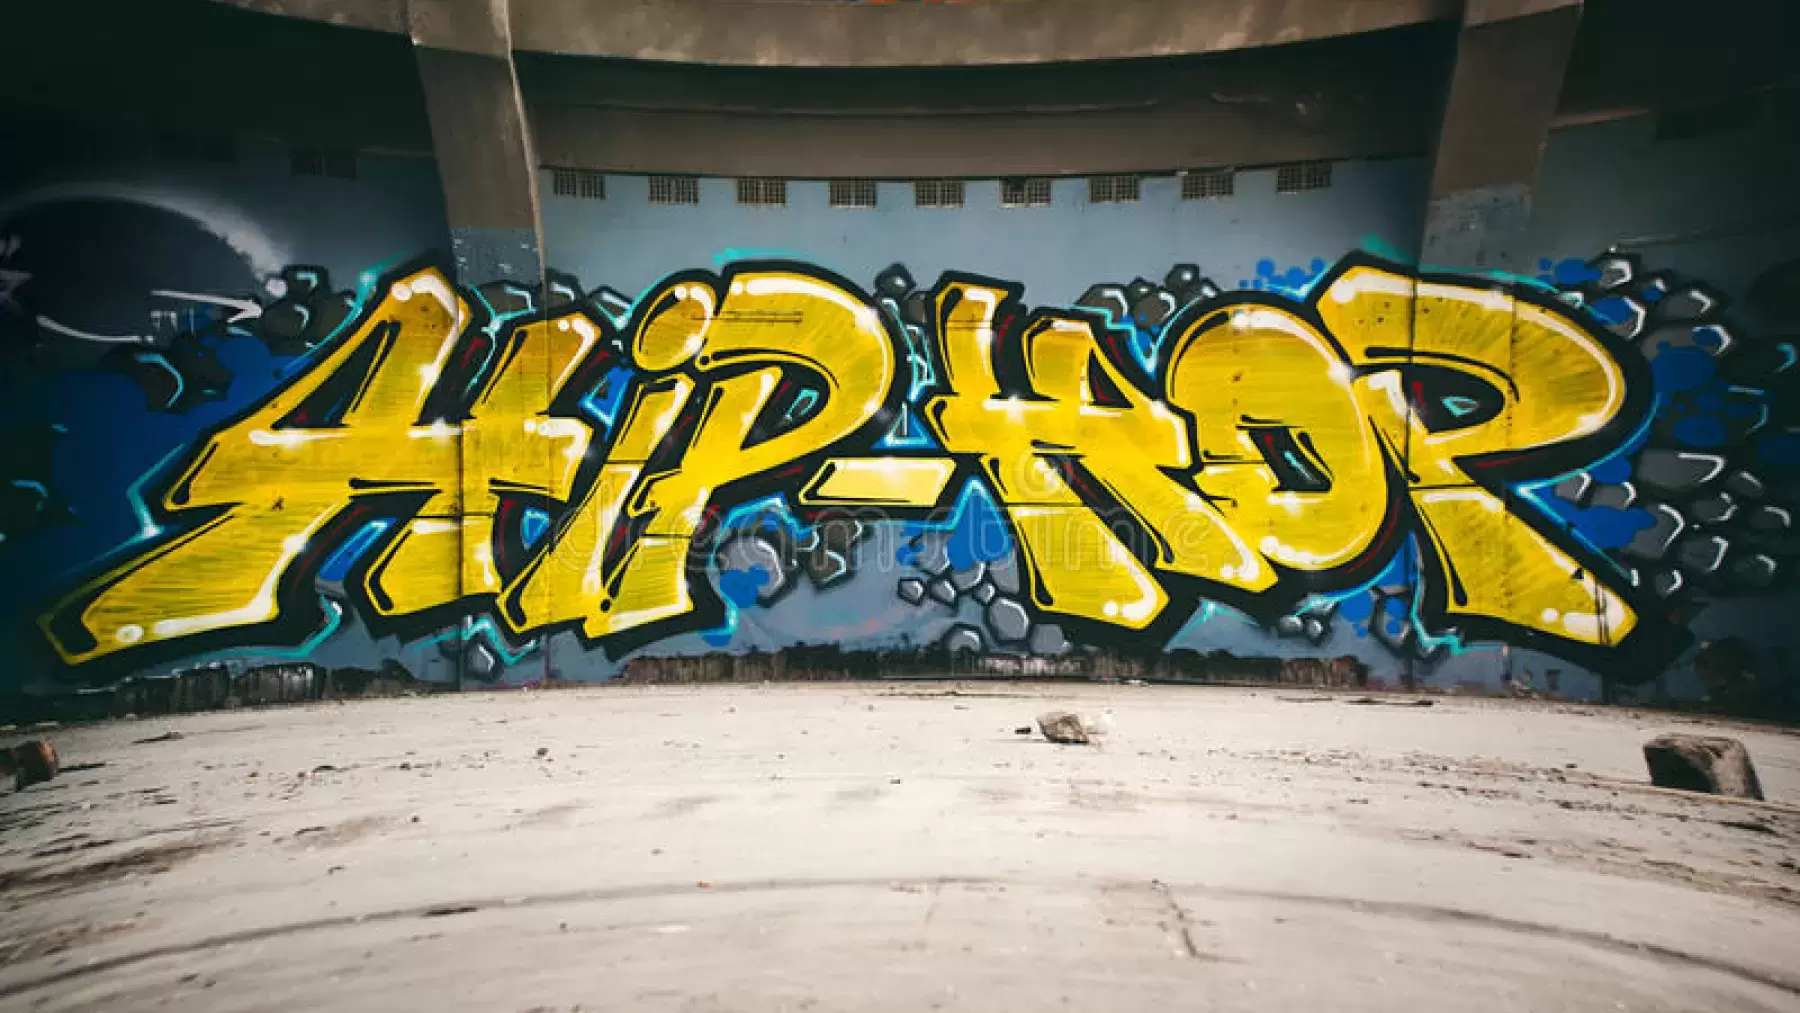 The words "hip-hop" written in graffiti on a wall.